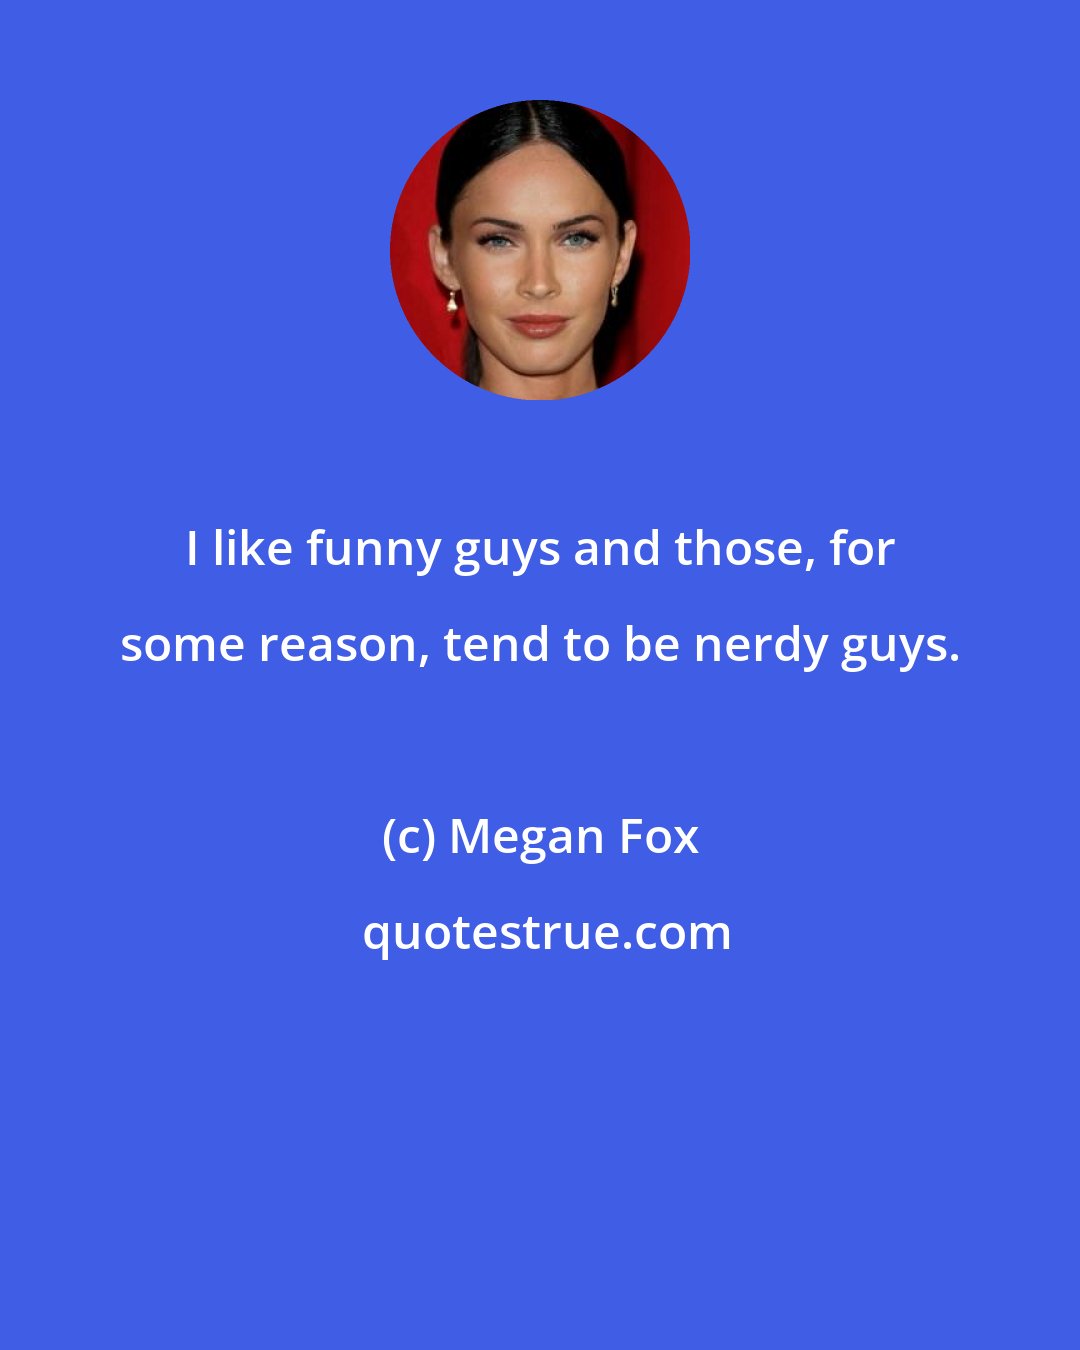 Megan Fox: I like funny guys and those, for some reason, tend to be nerdy guys.